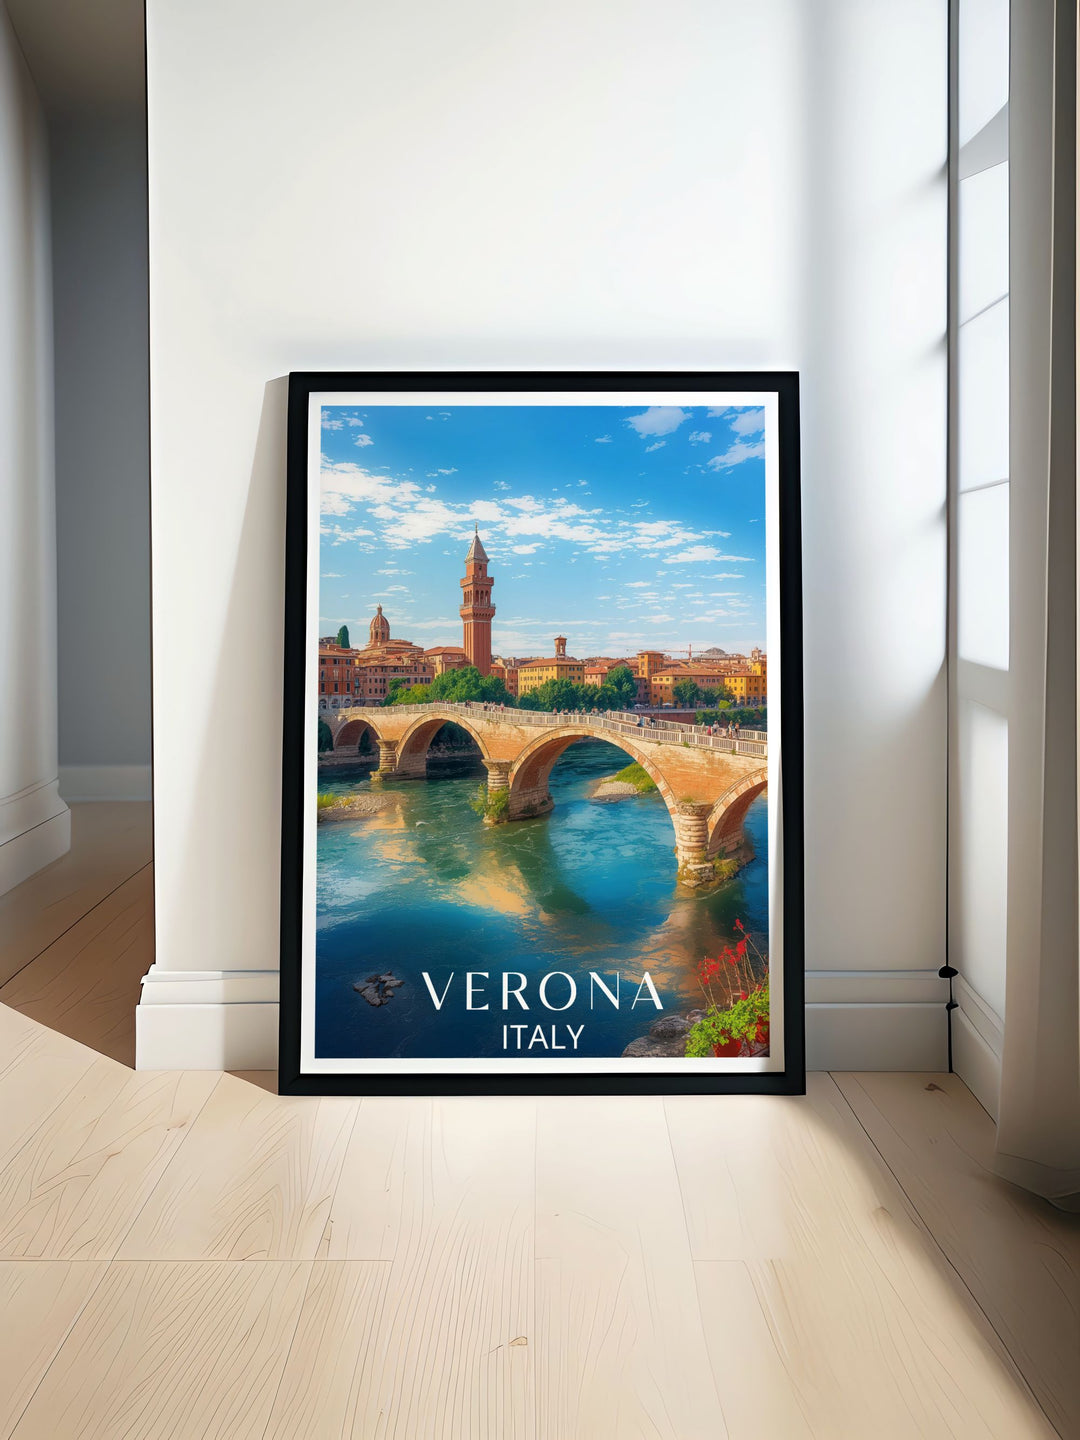 Stunning view of Ponte Pietra in Verona Italy captured in a beautiful Italy travel print perfect for home decor or as a unique Verona gift showcasing the historic charm and beauty of this ancient Roman bridge and its surroundings.